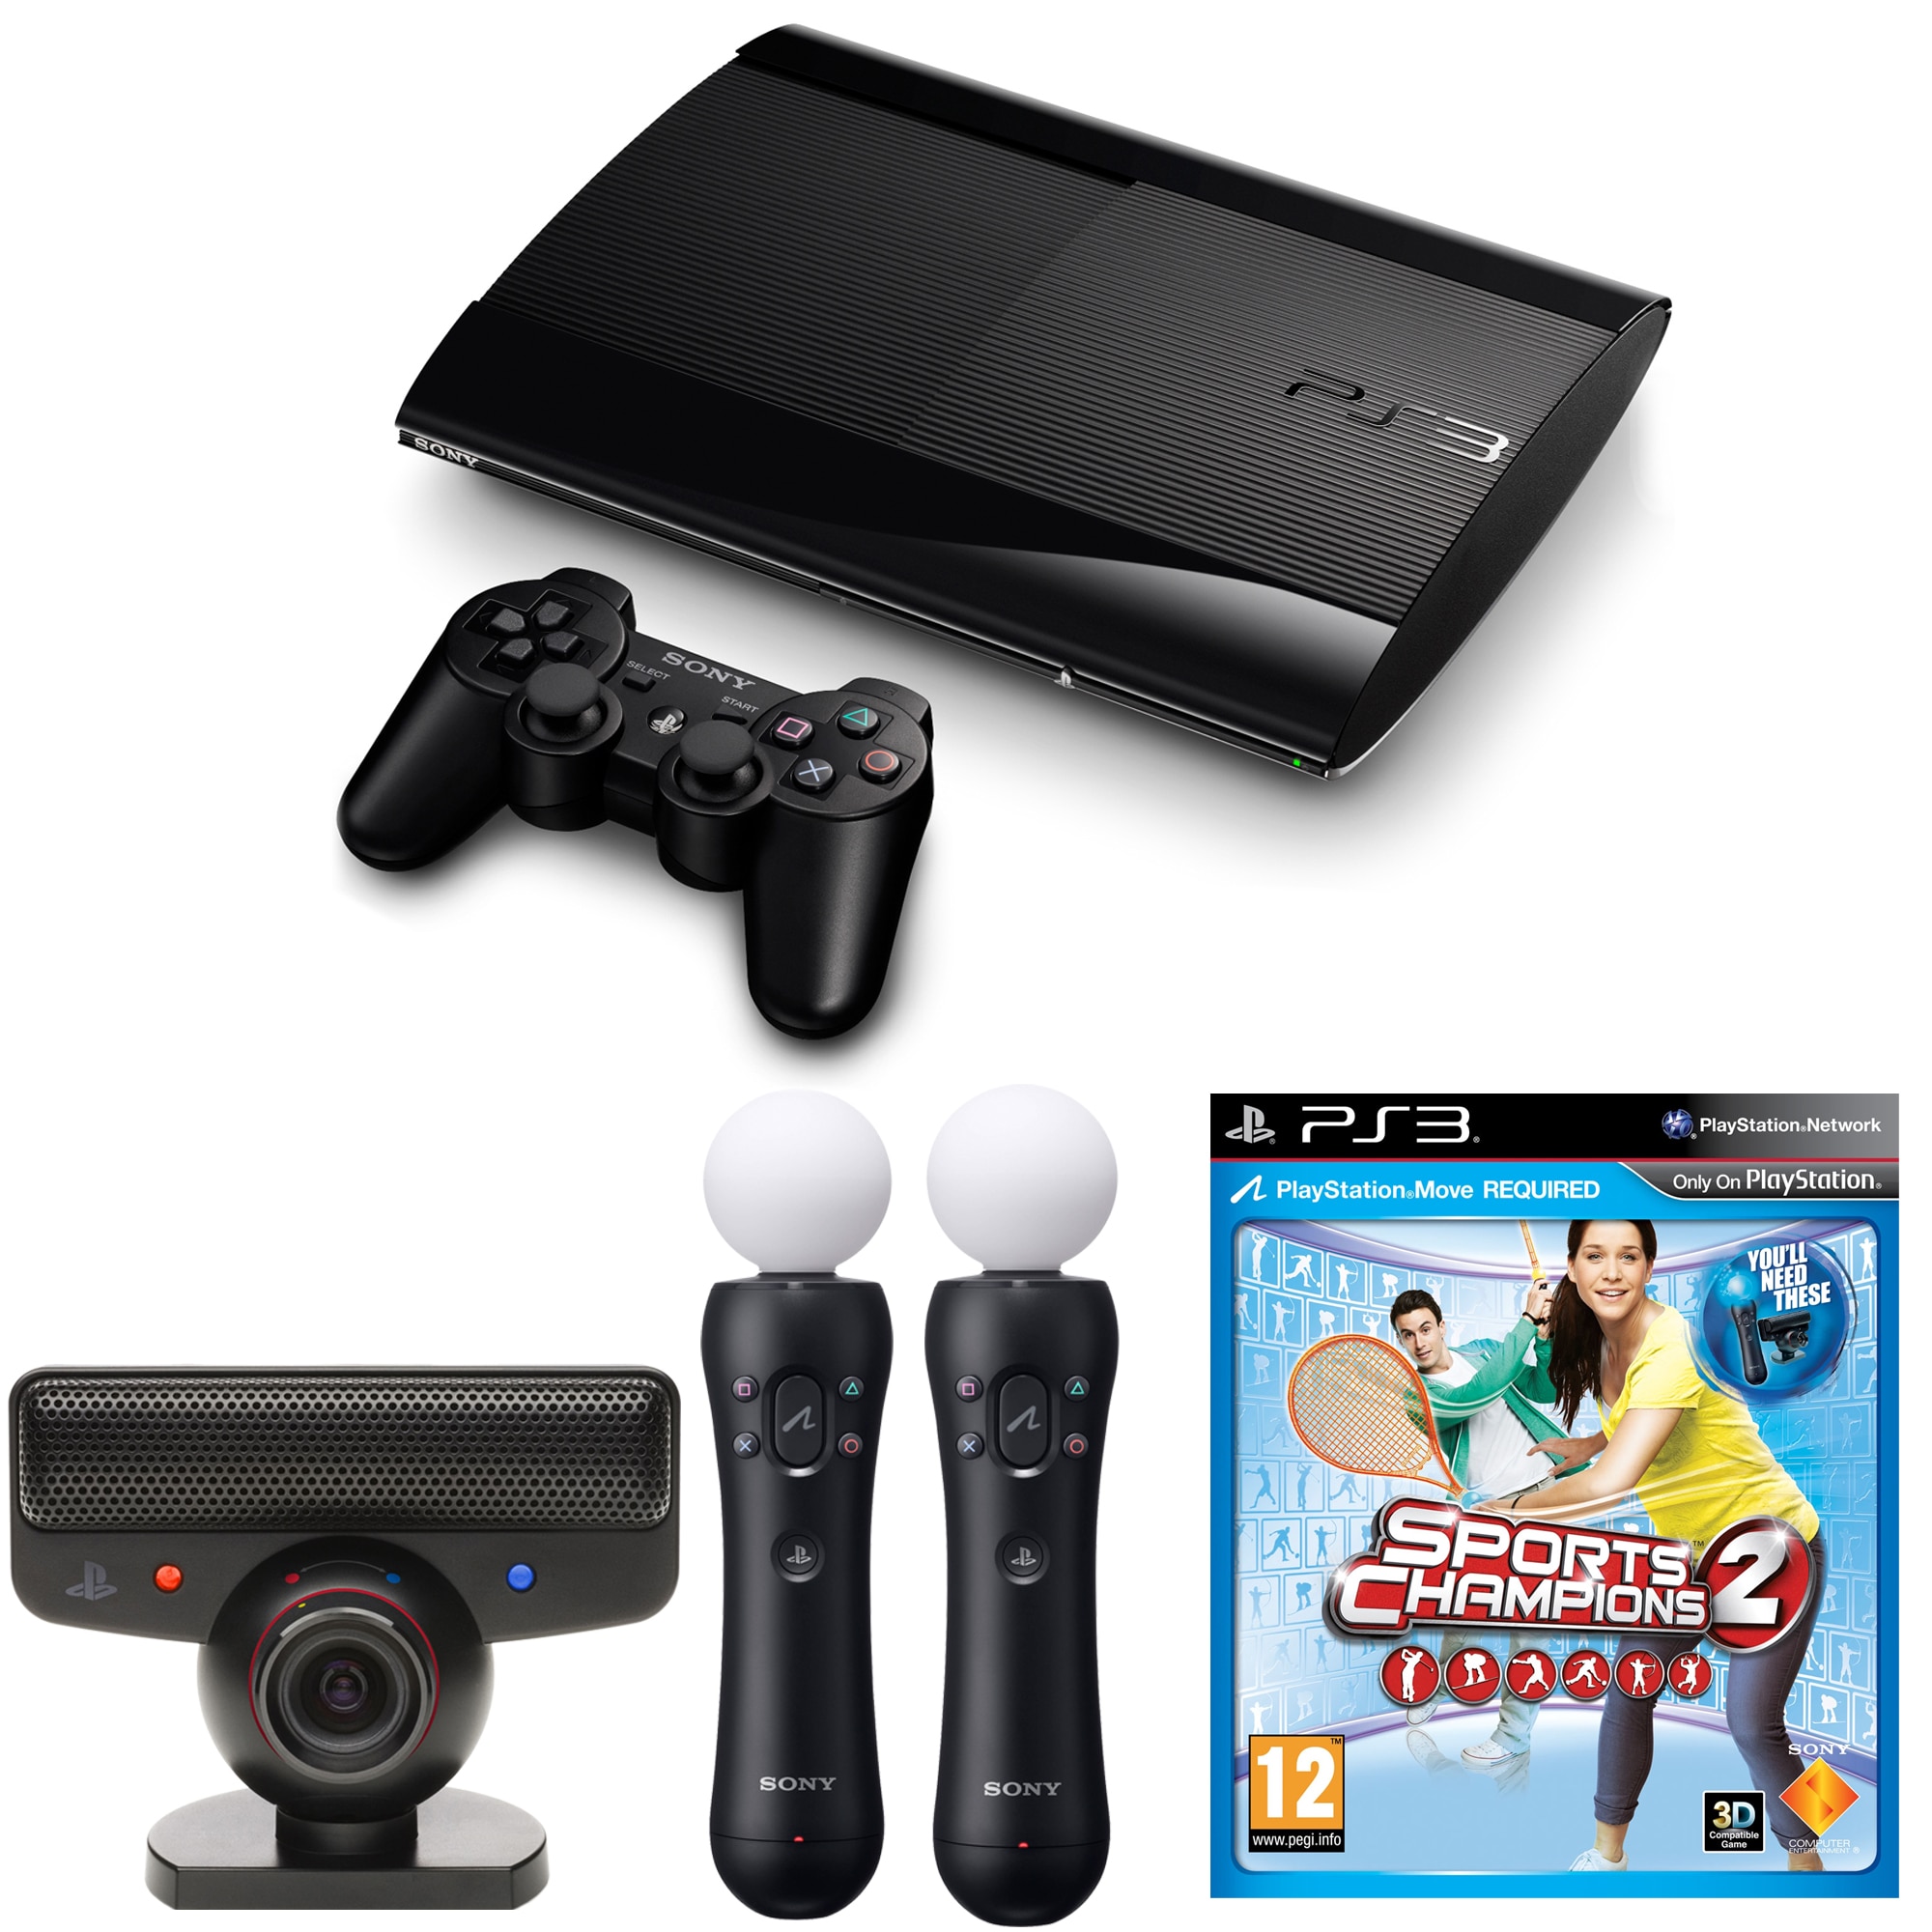 Wide range disk bolt Consola Sony PlayStation 3, 12GB + Joc Sports Champions 2 + 2 x Move Motion  Controller, Negru - eMAG.ro